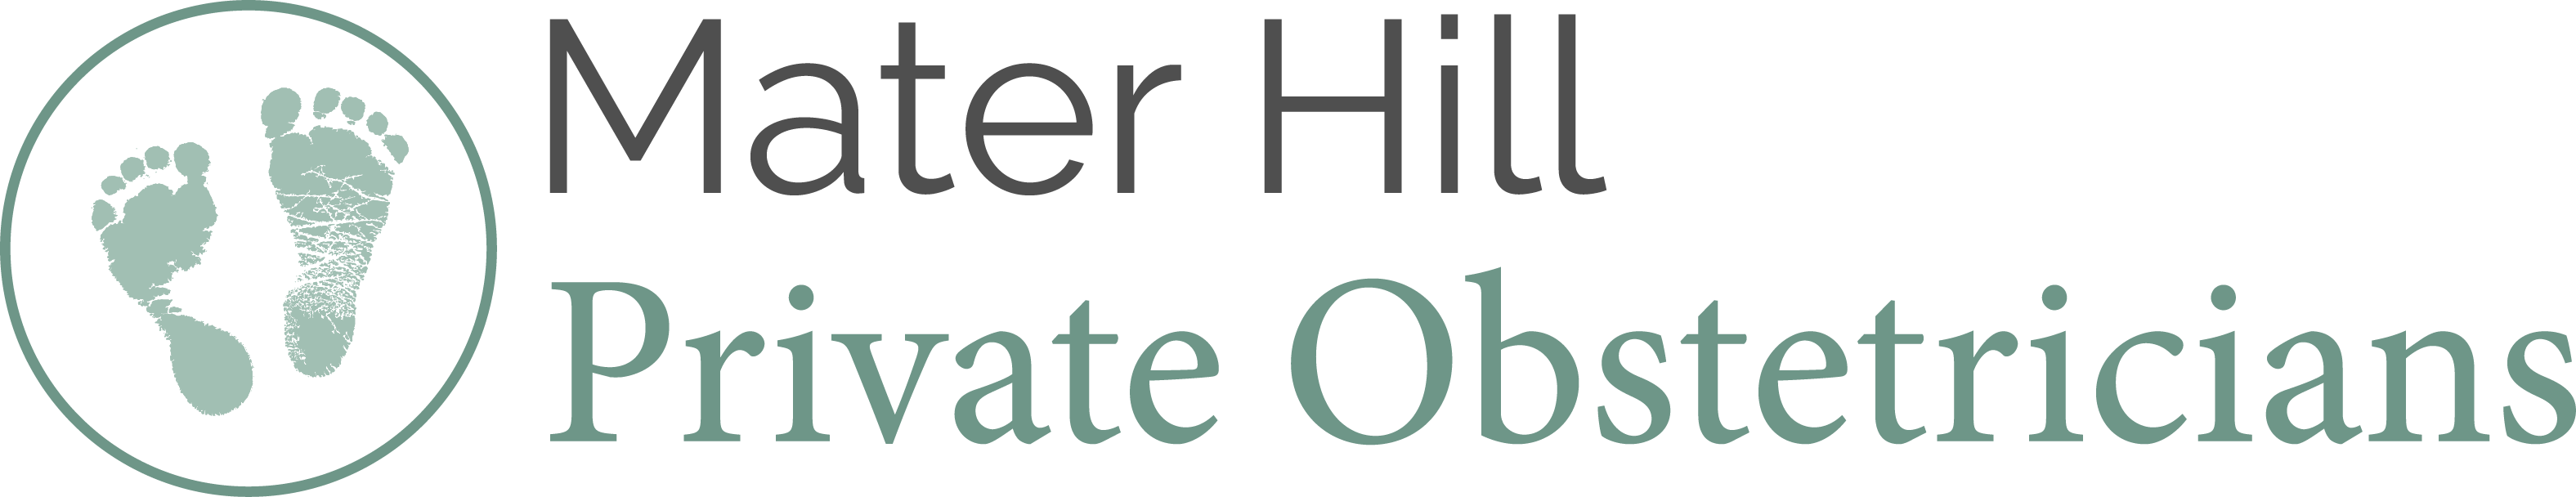 Mater Hill Private Obstetricians